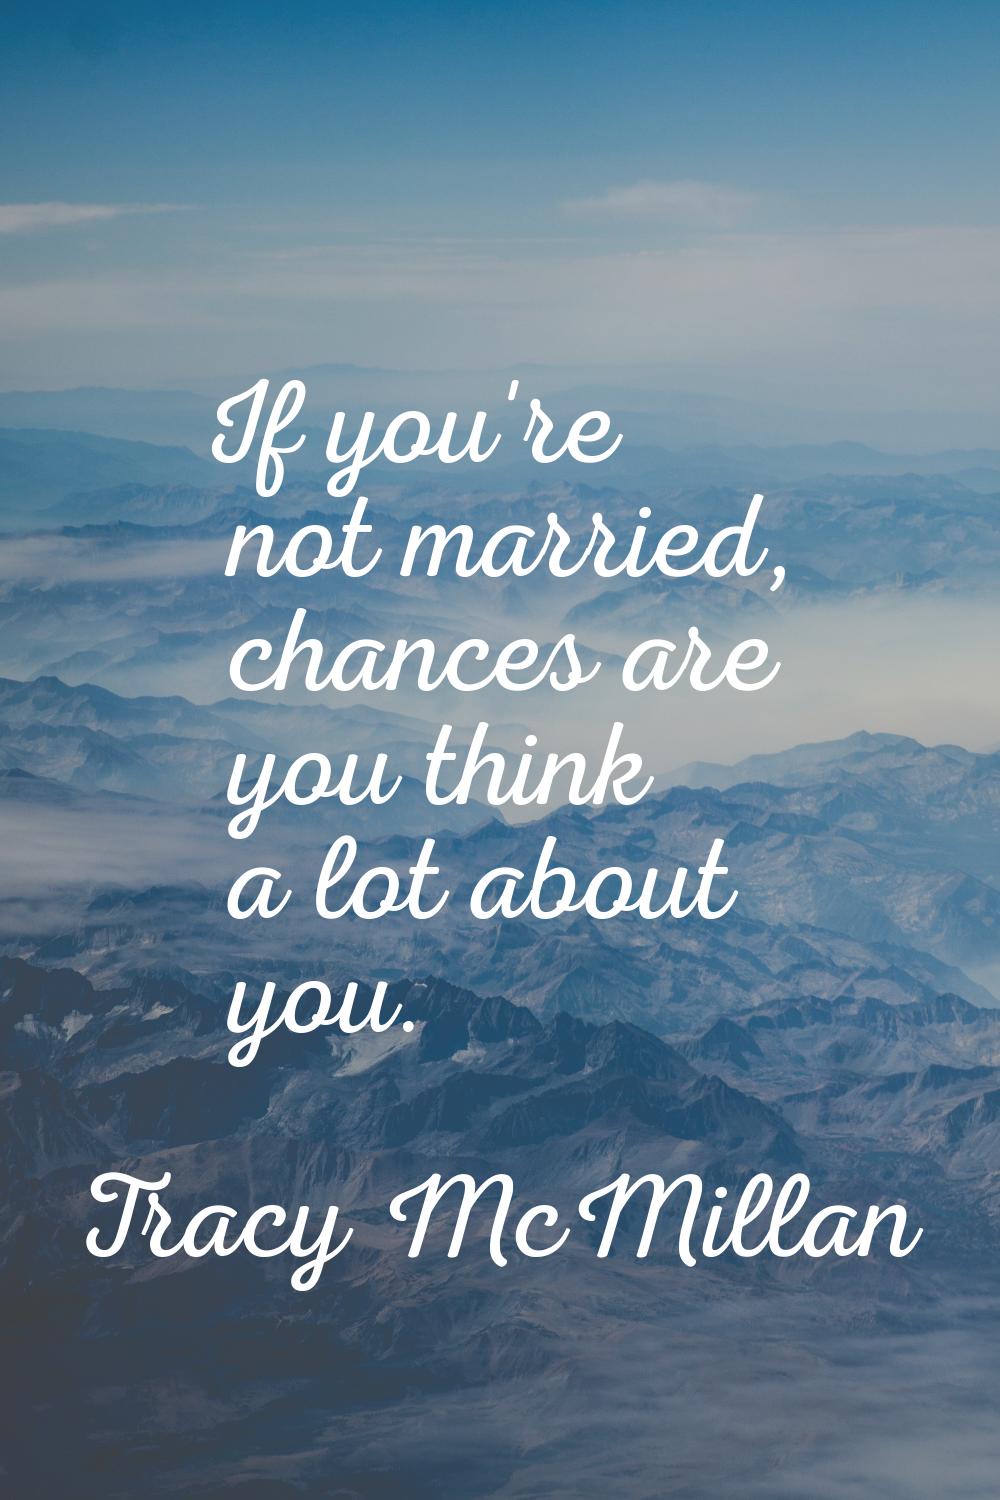 If you're not married, chances are you think a lot about you.